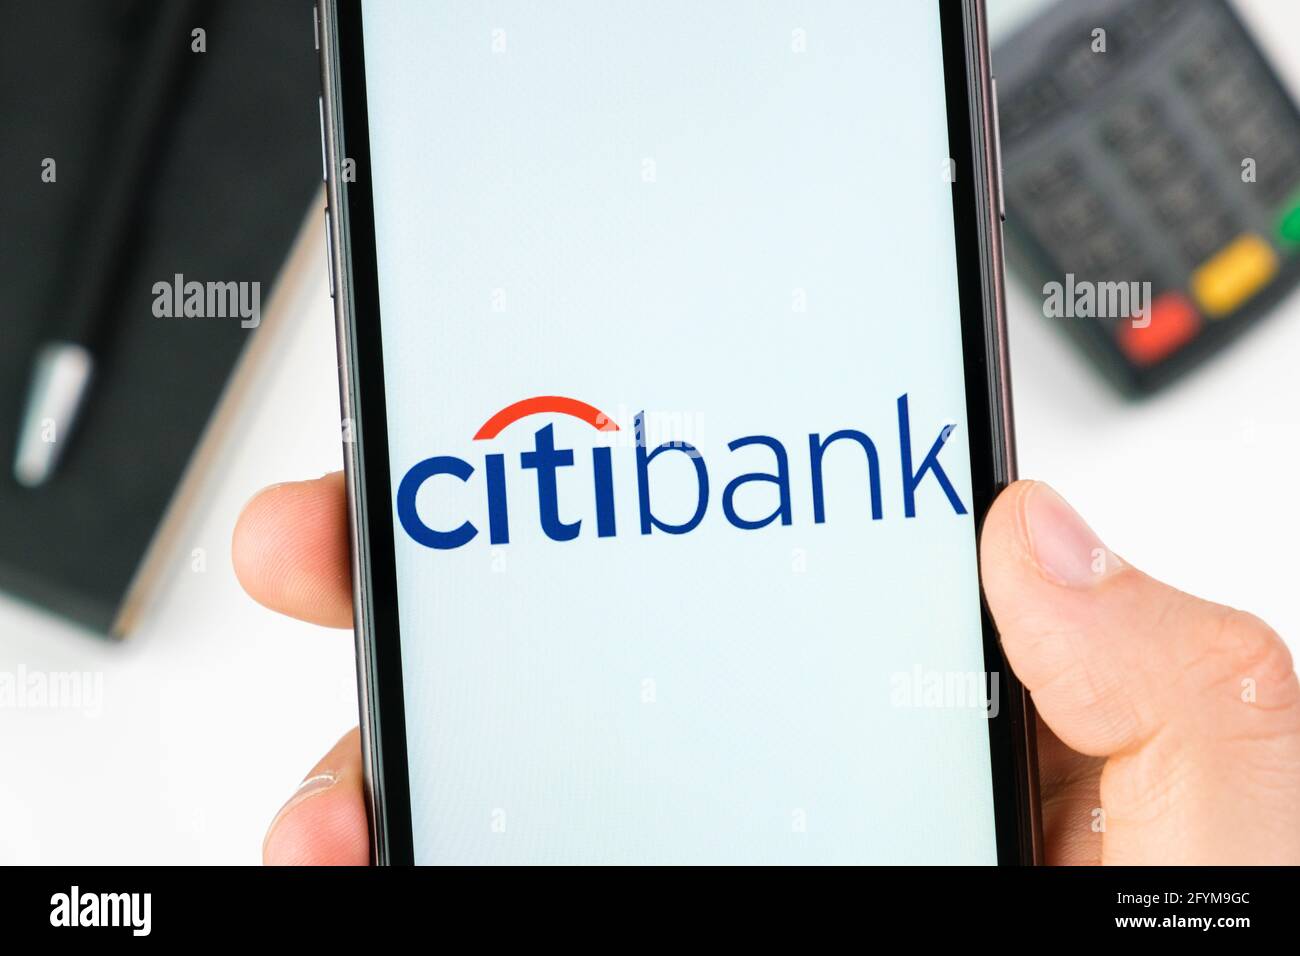 Citi bank logo on the smartphone screen in mans hand on the background of payment terminal, May 2021, San Francisco, USA Stock Photo